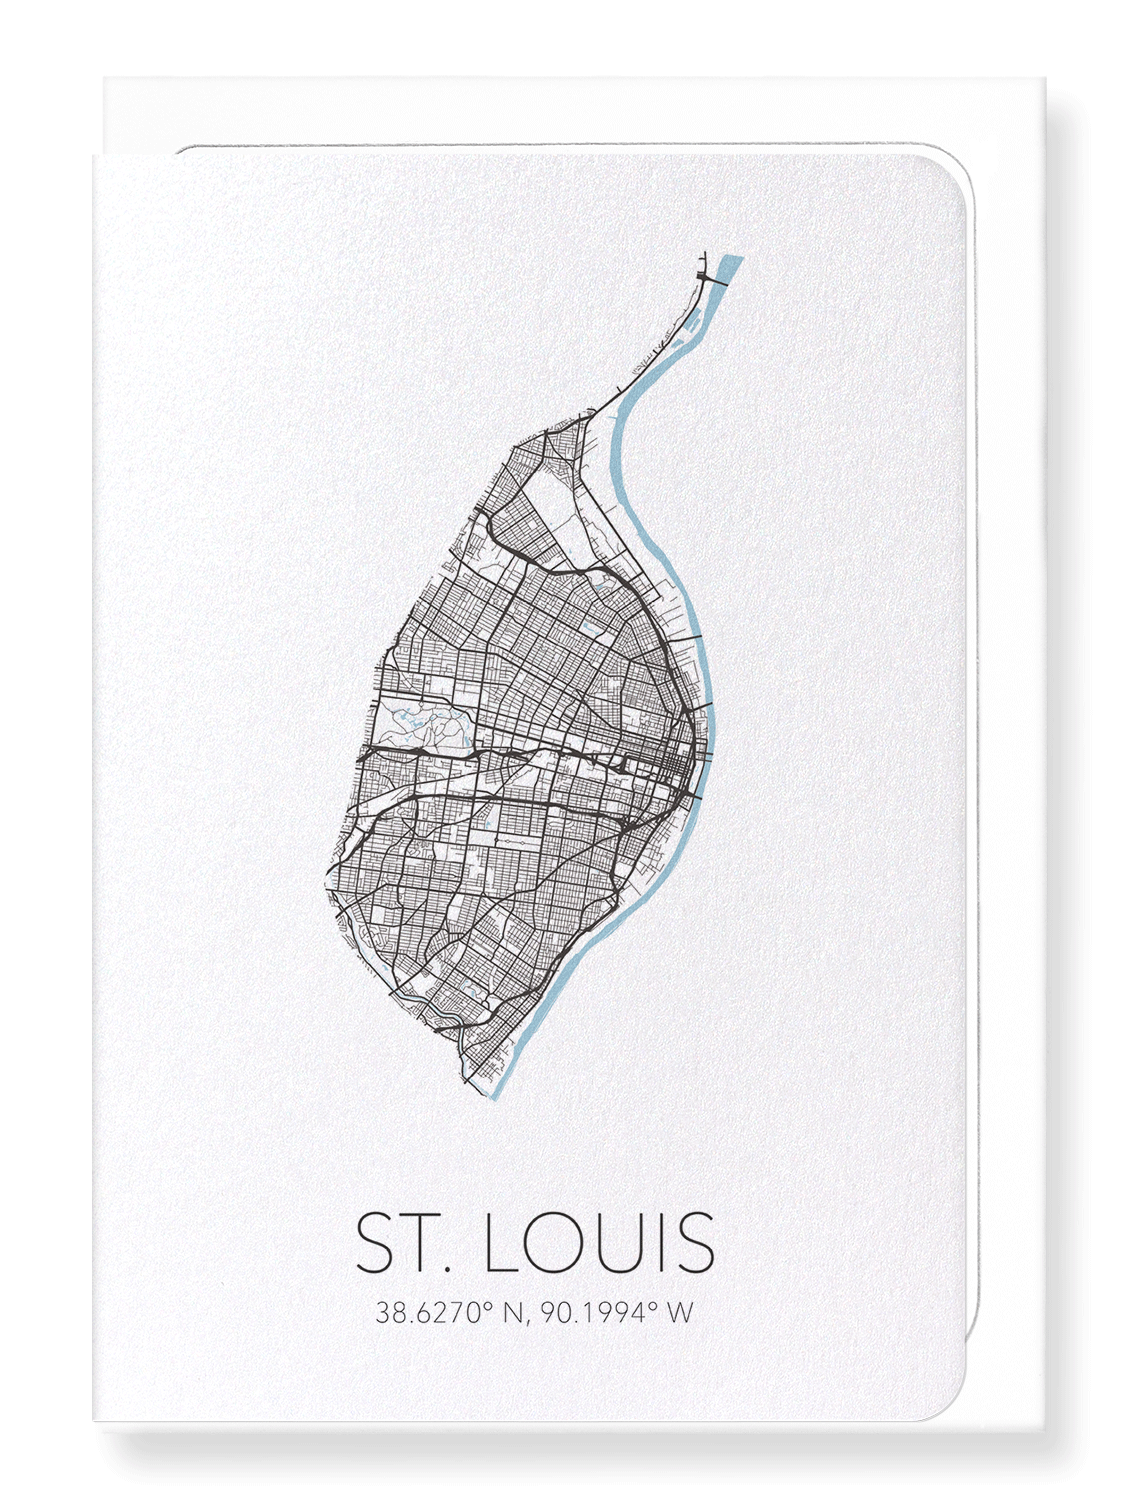 ST. LOUIS CUTOUT: 8xCards